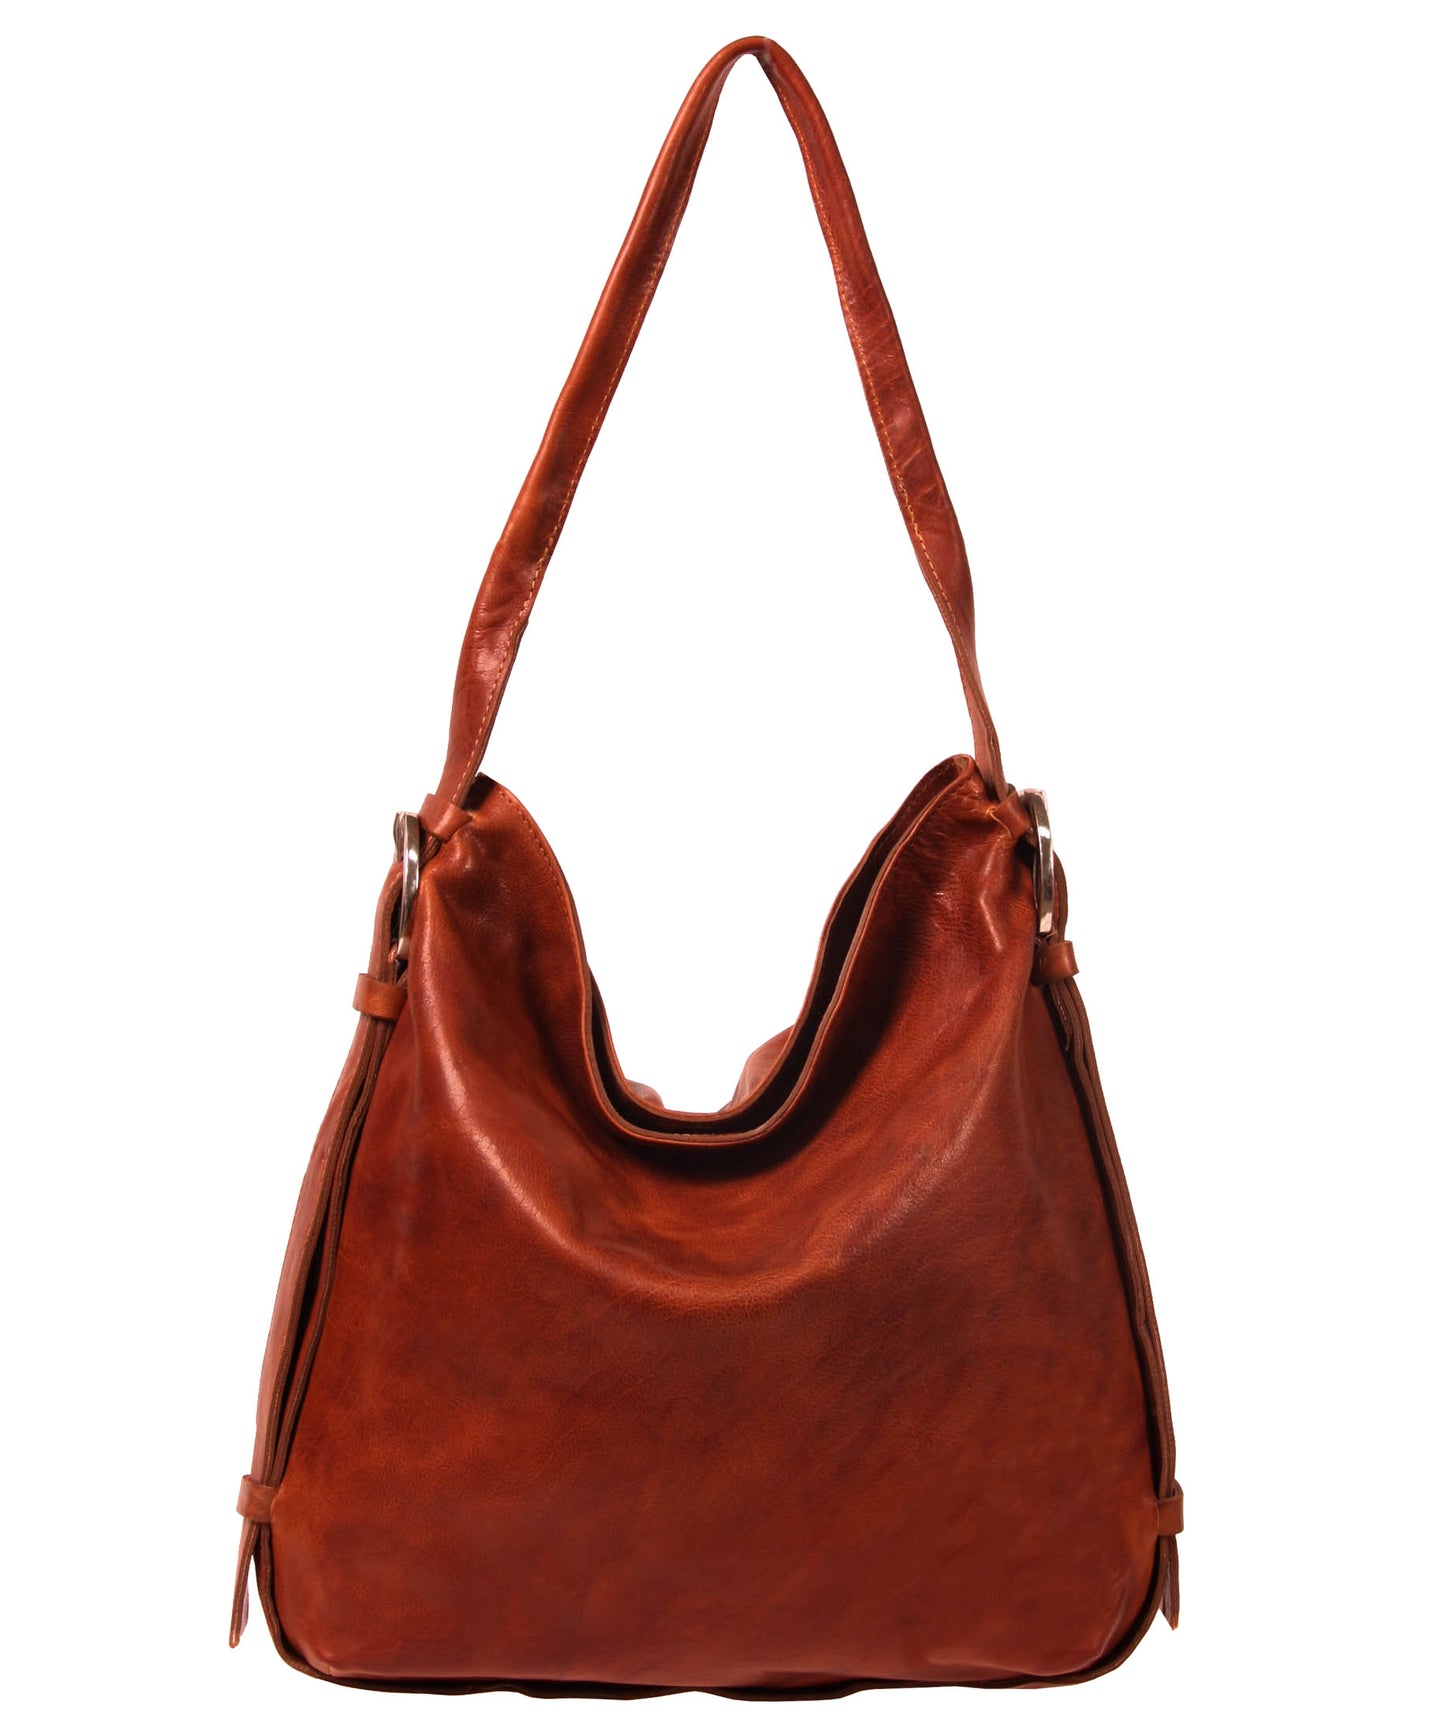 Slouchy Rounded Hobo